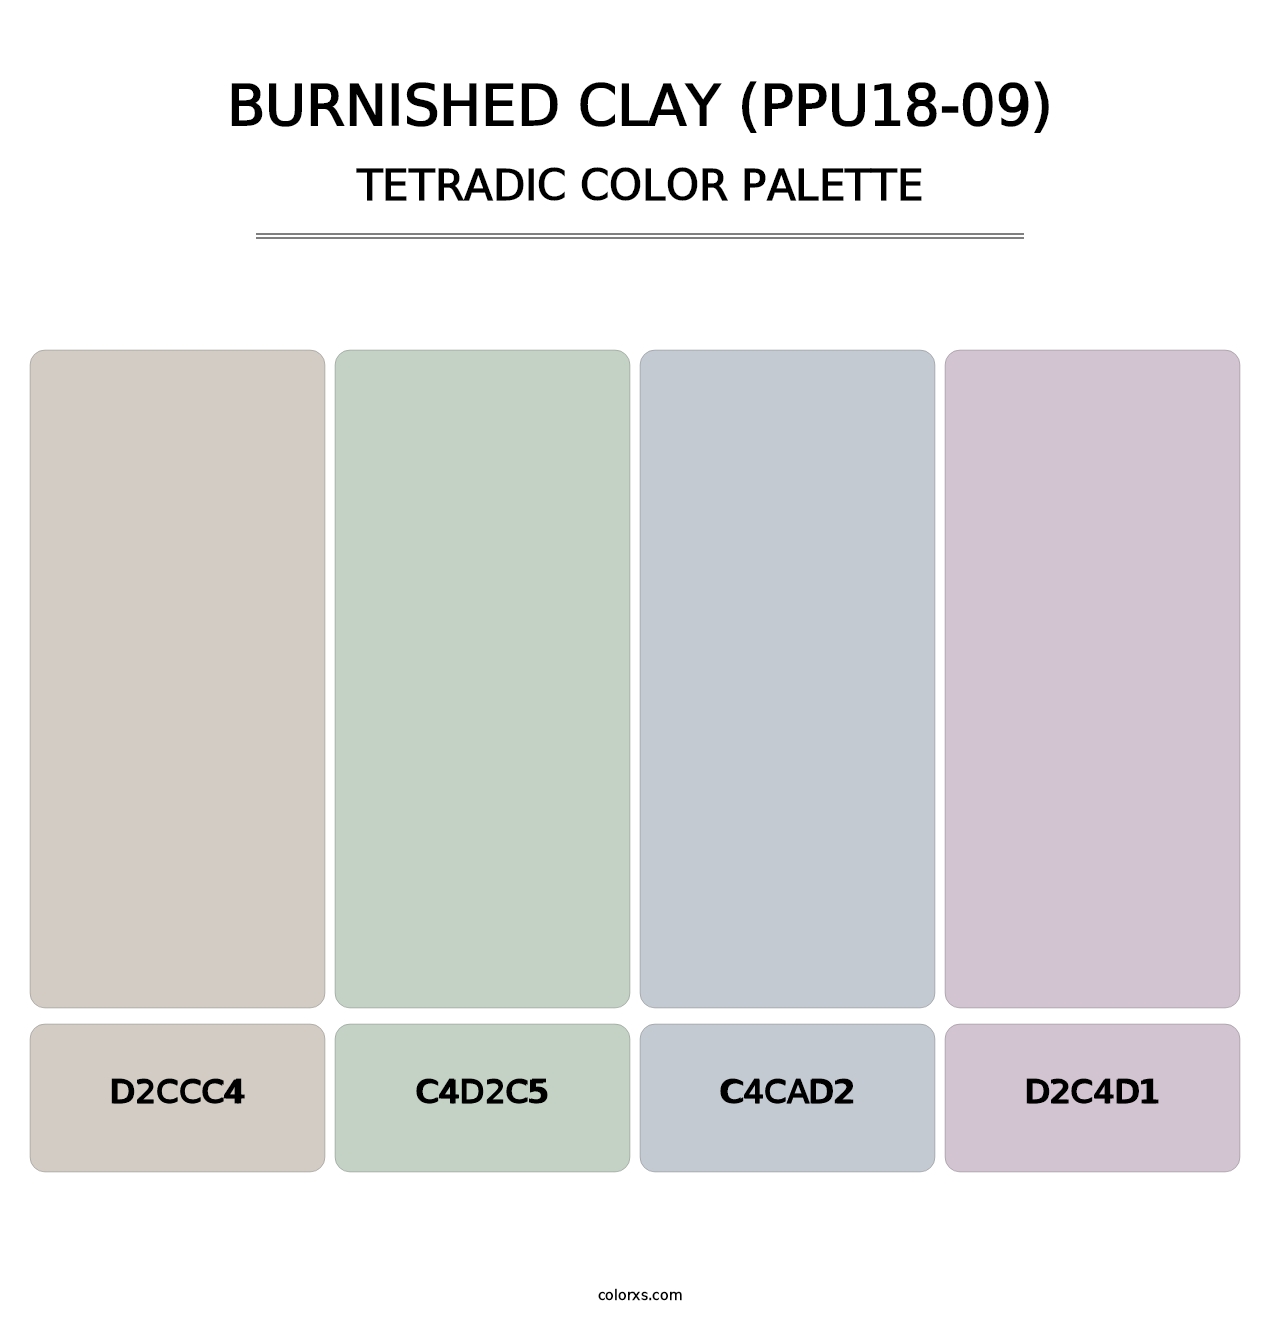 Burnished Clay (PPU18-09) - Tetradic Color Palette